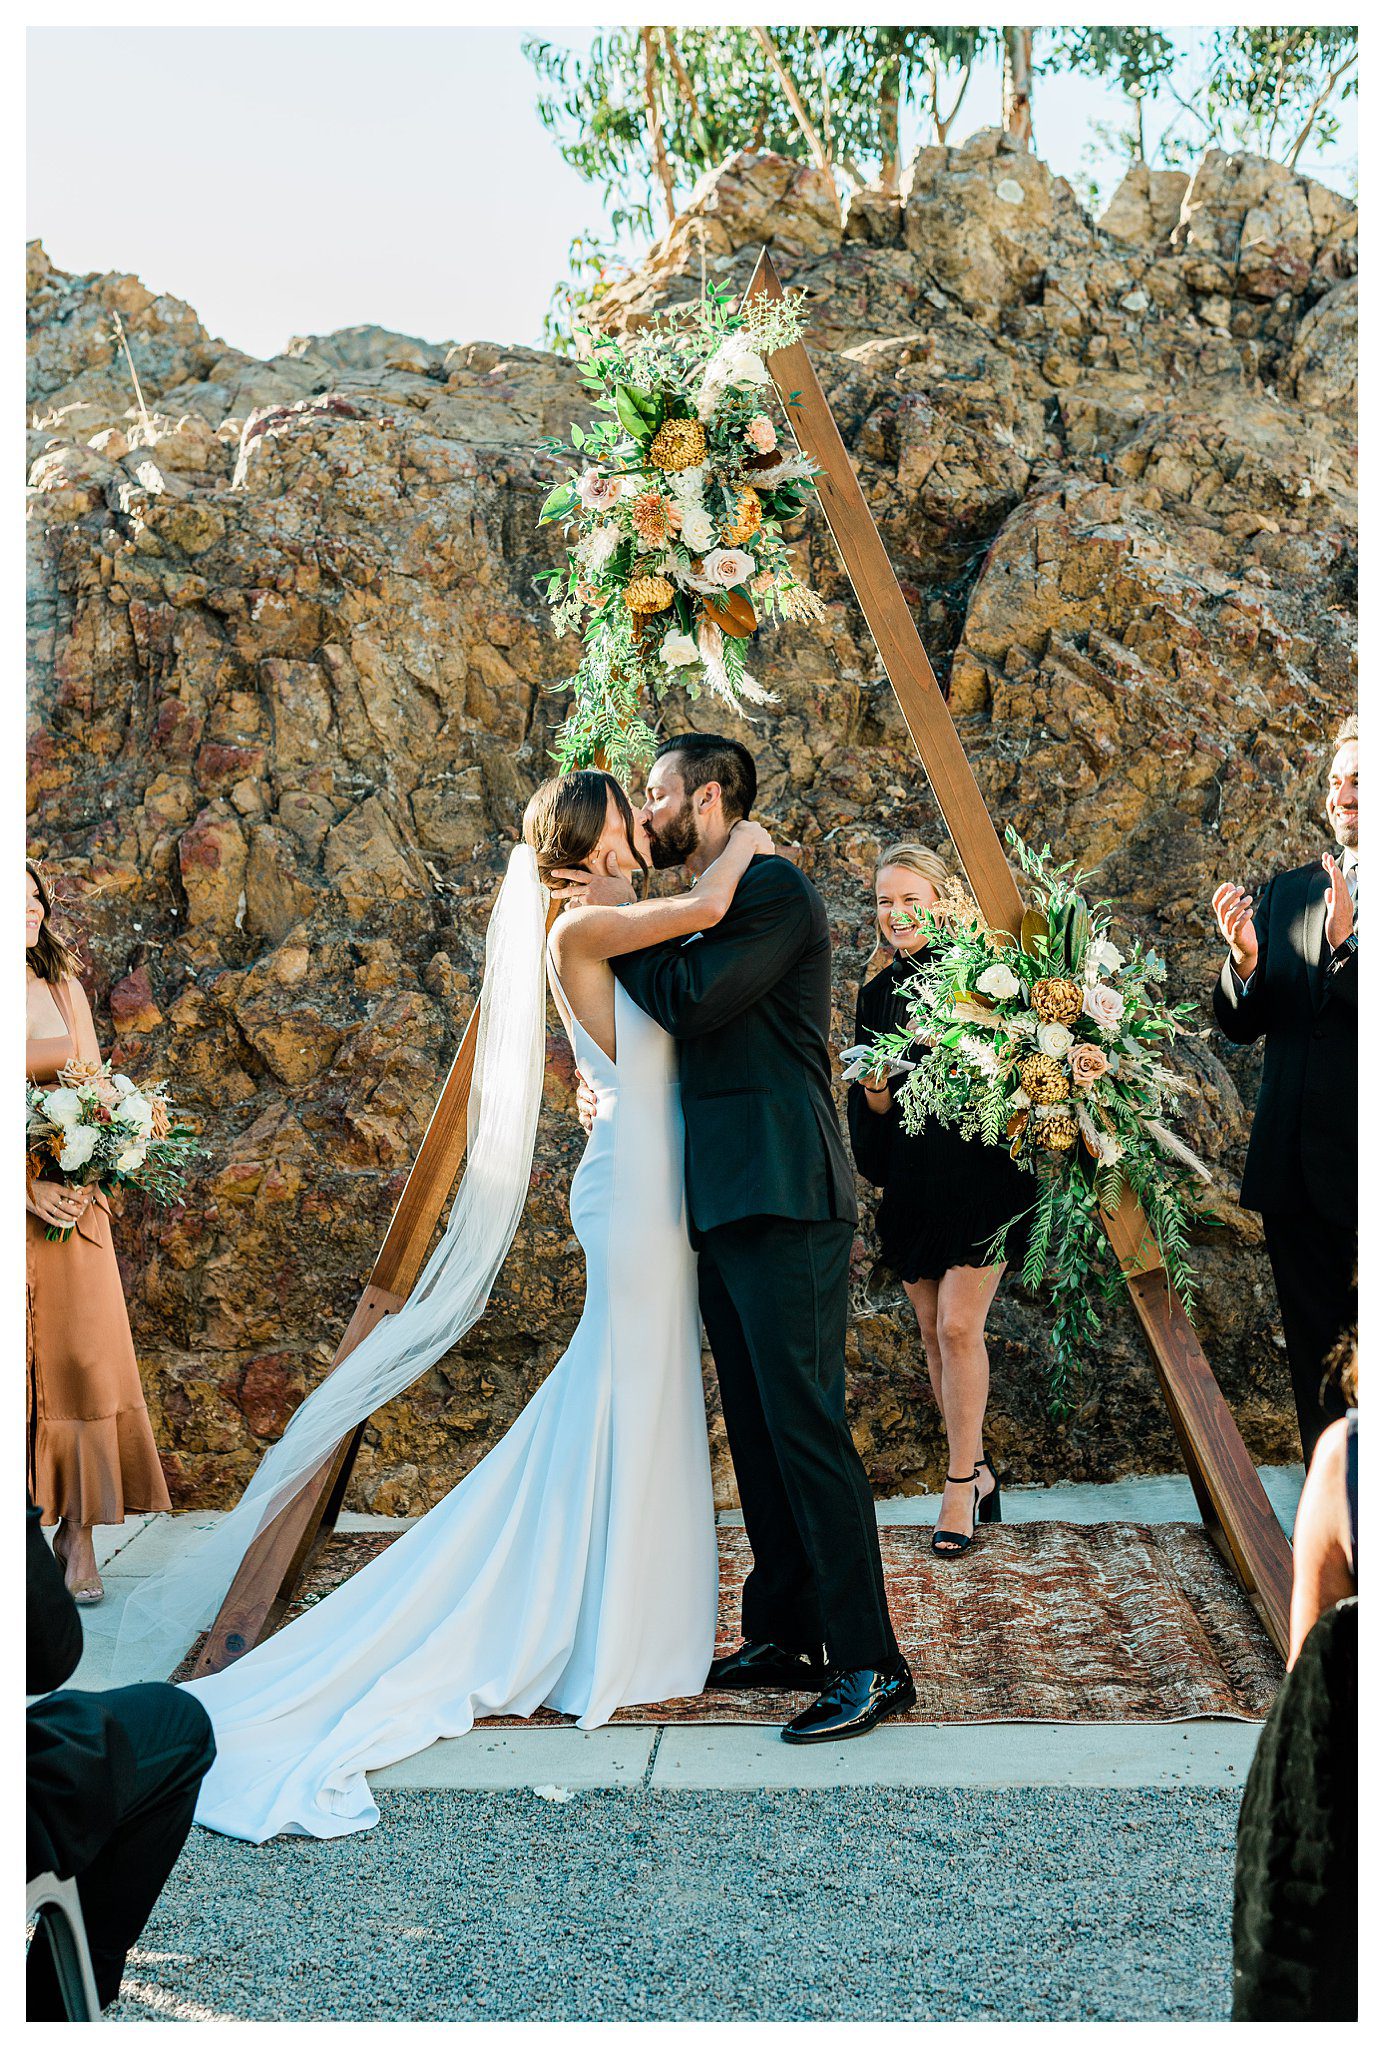 Slo brew Rock wedding ceremony, bride and groom kissing in front of a boho style triangle ceremony arch and warm fall colors in san luis obispo.